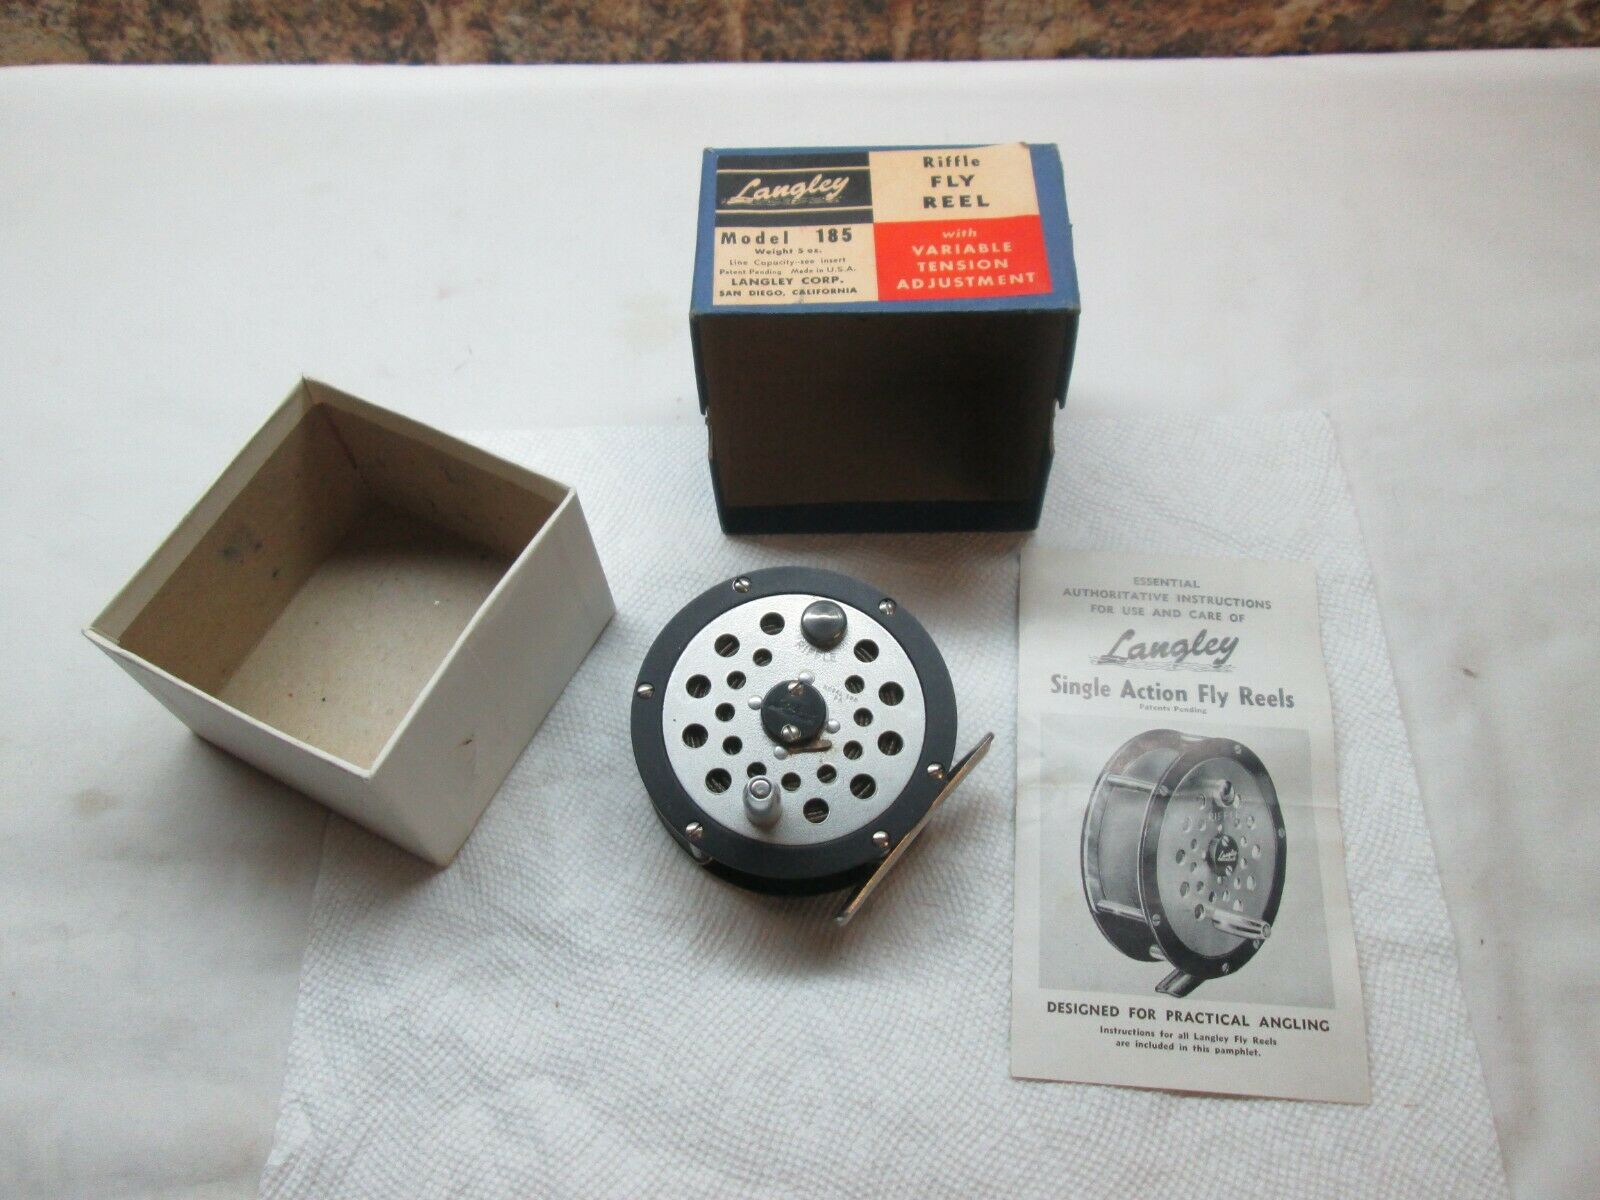 Vintage Langley Model 185 Riffle Fly Reel W/orginal Box & Paperwork ~ Exc Cond ~